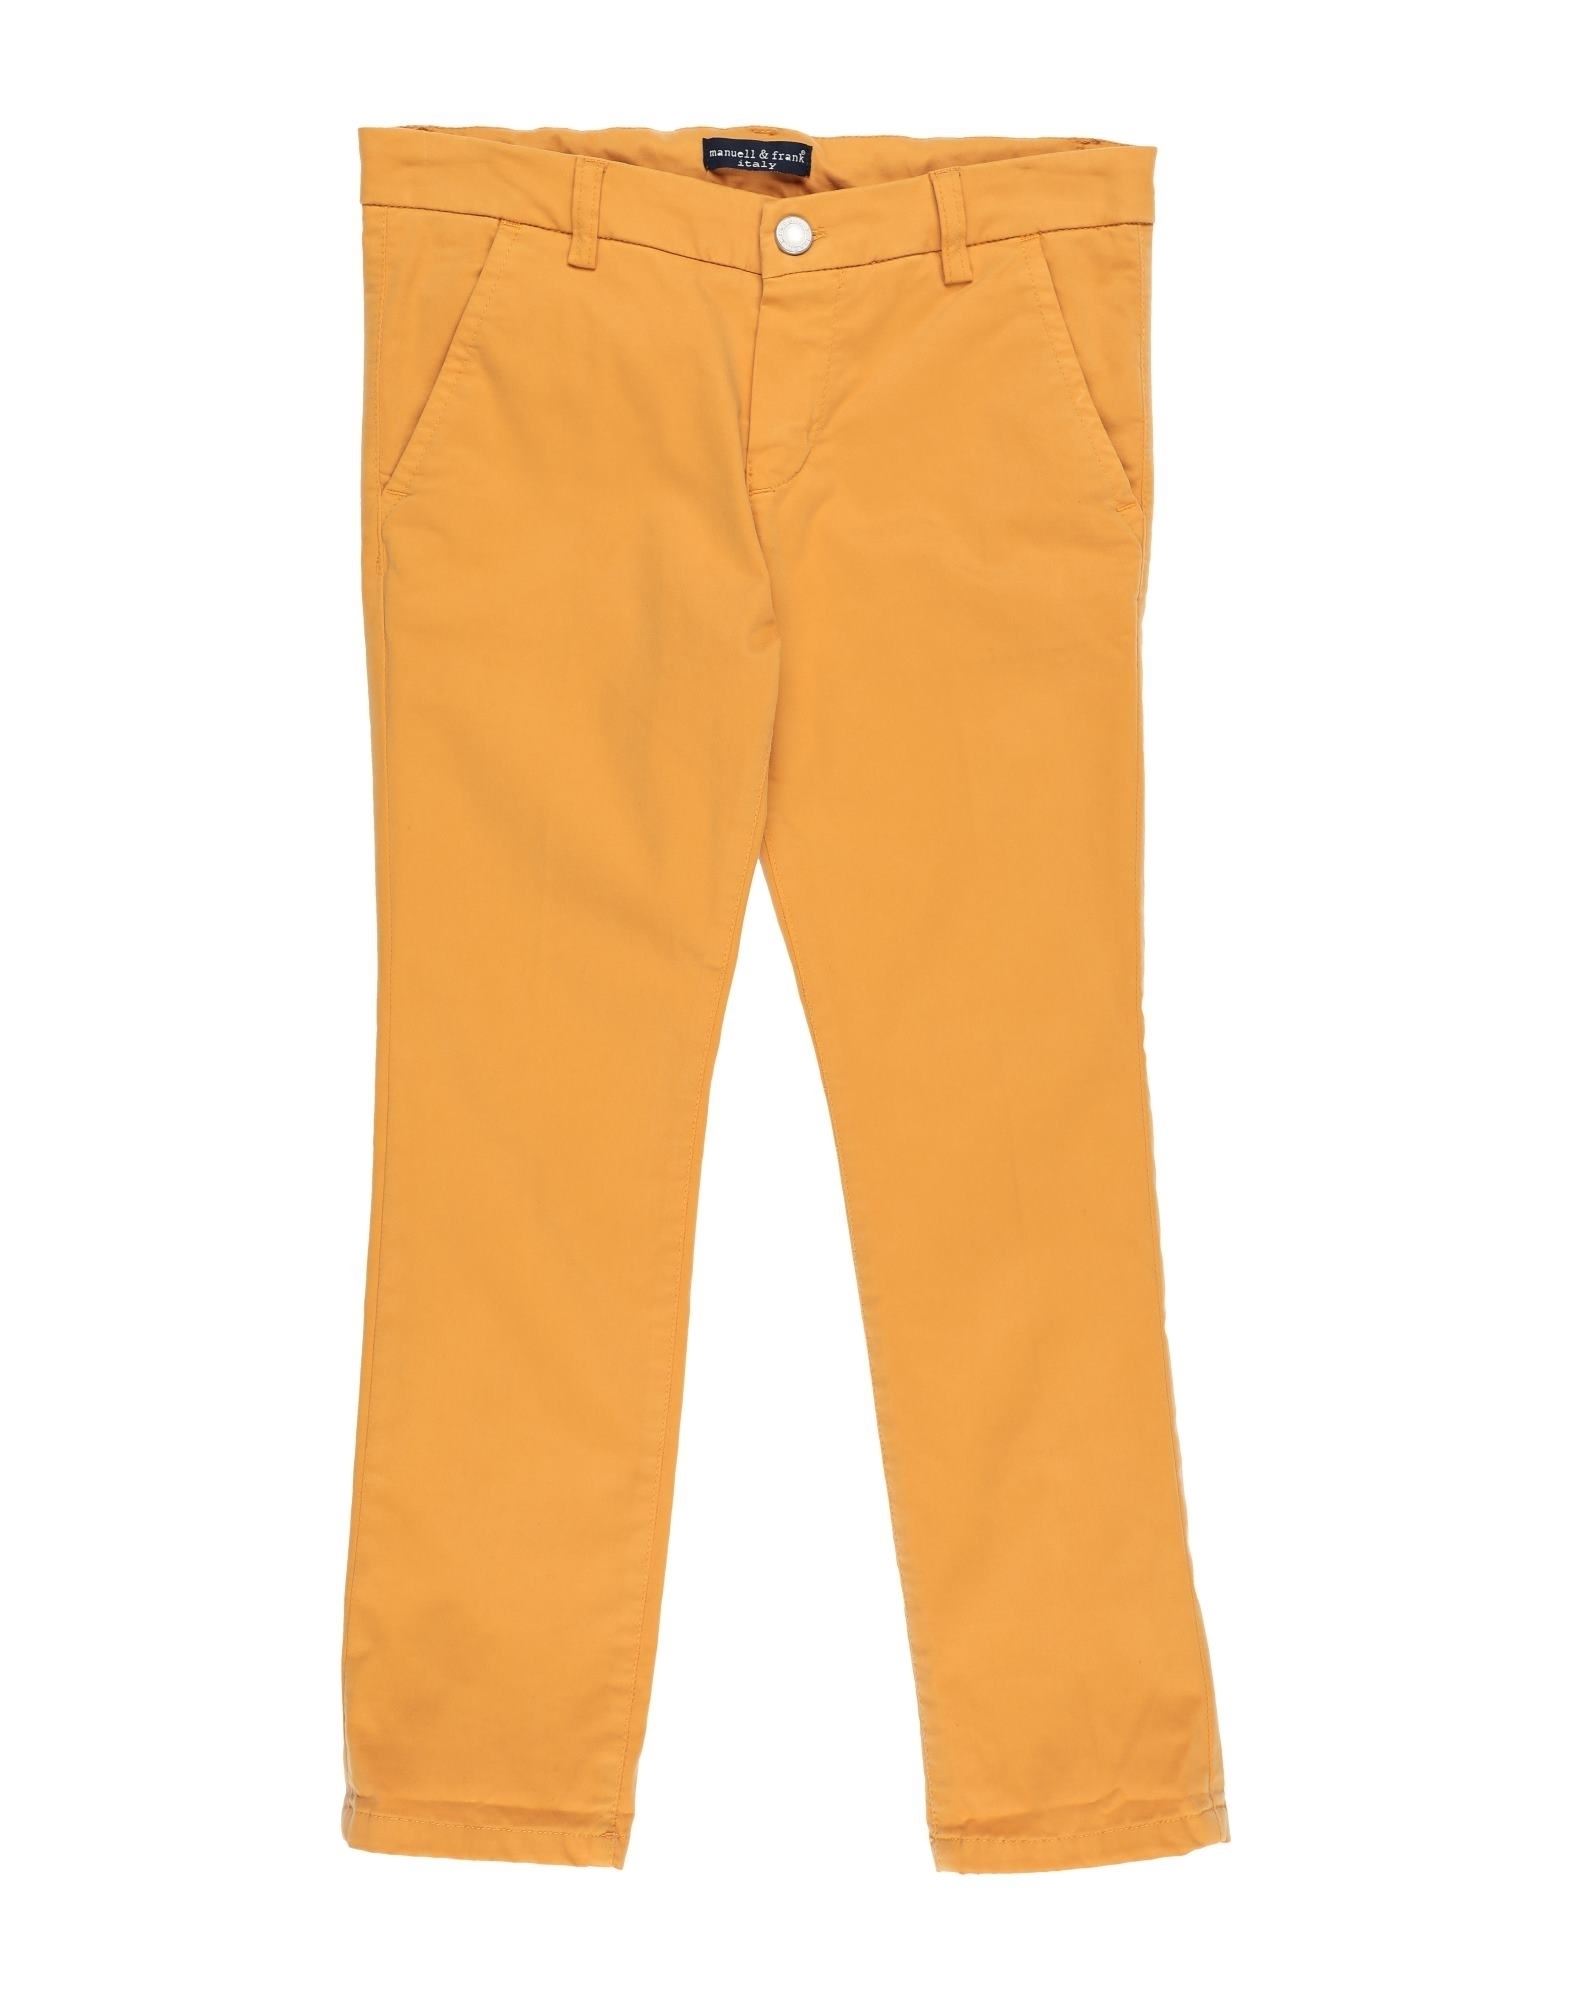 Manuell & Frank Kids' Pants In Yellow